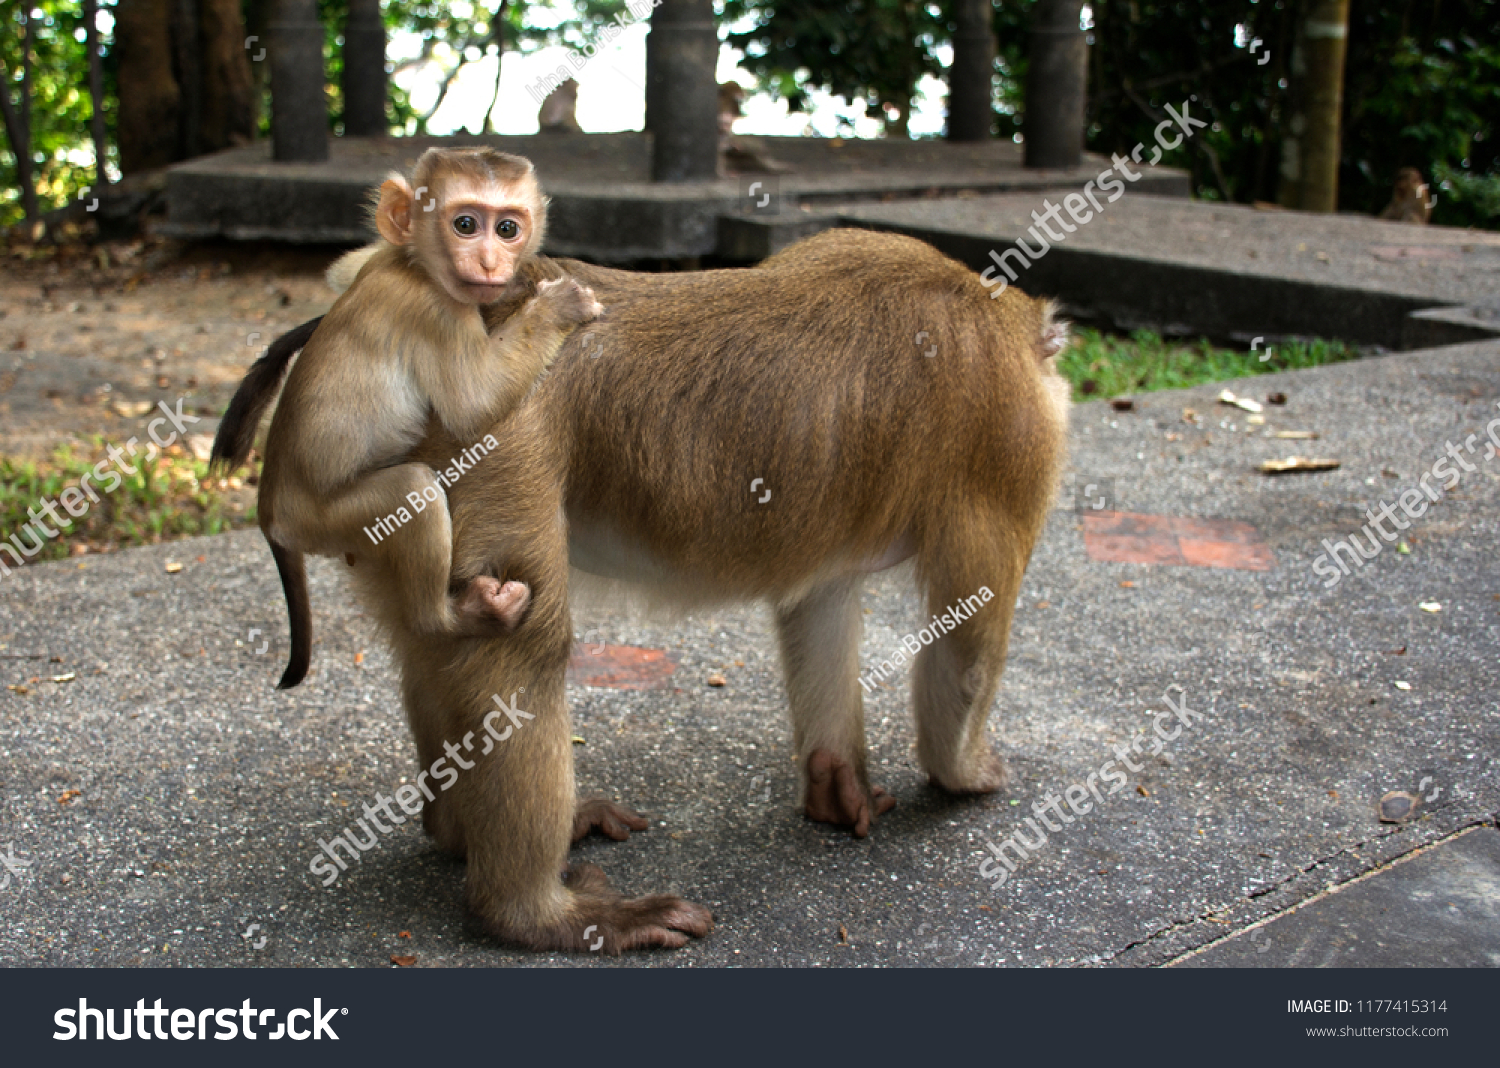 Wild monkeys in the jungle. Monkeys in the wild. Monkeys of the breed are Macaque. #1177415314